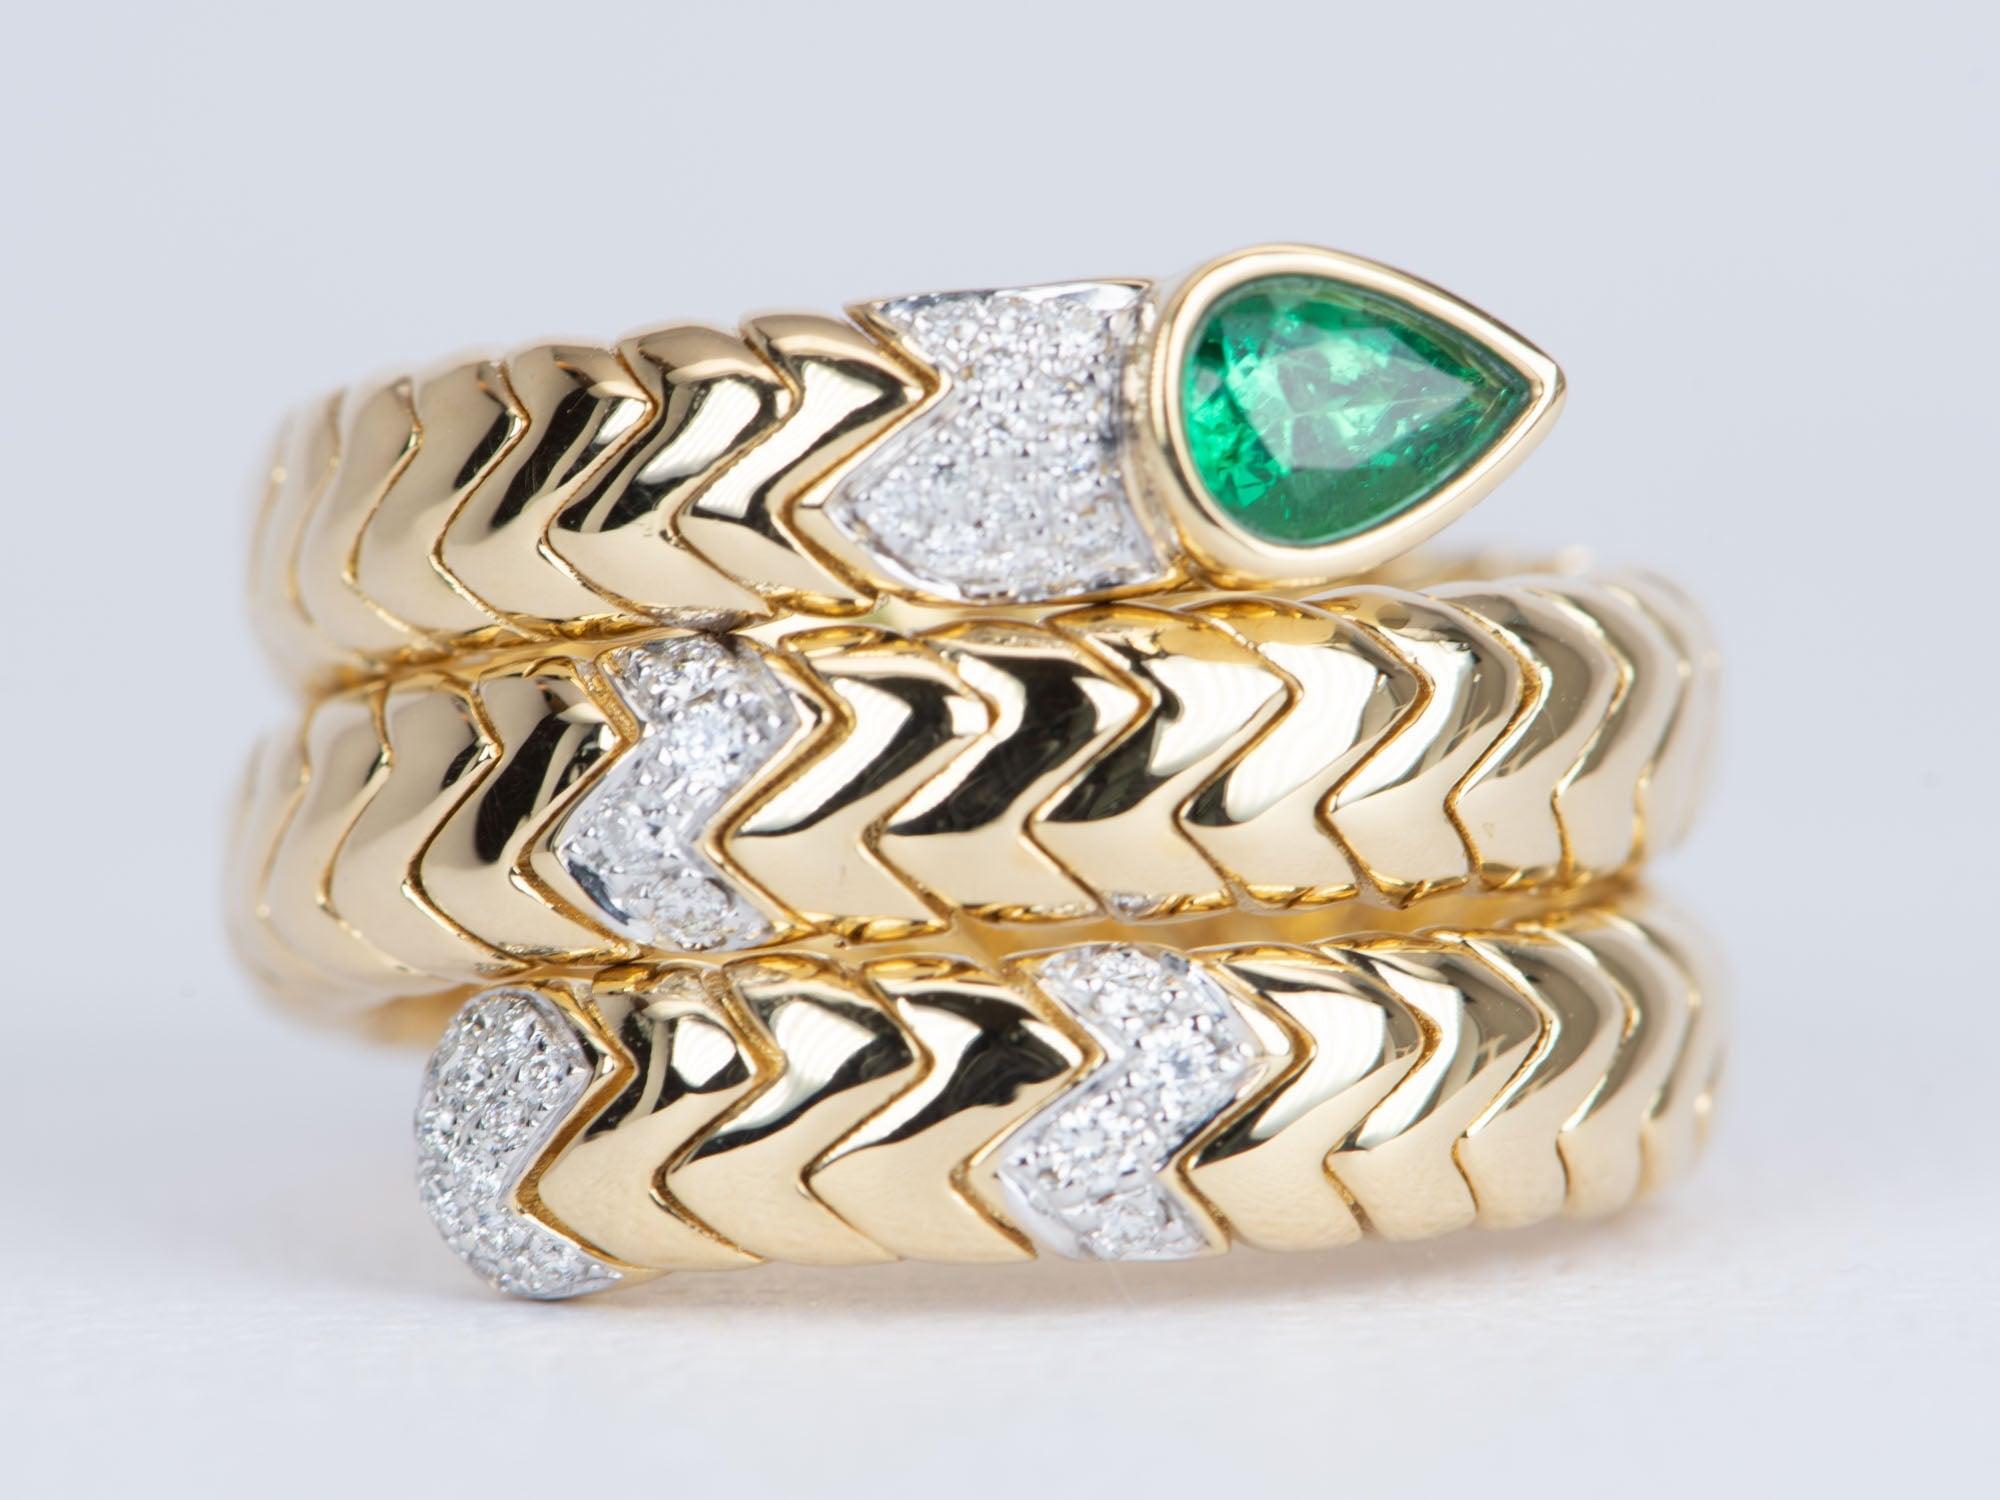 18k Gold Tubogas Snake Coil Ring with Emerald Head and Diamond Accent 13.8g 1